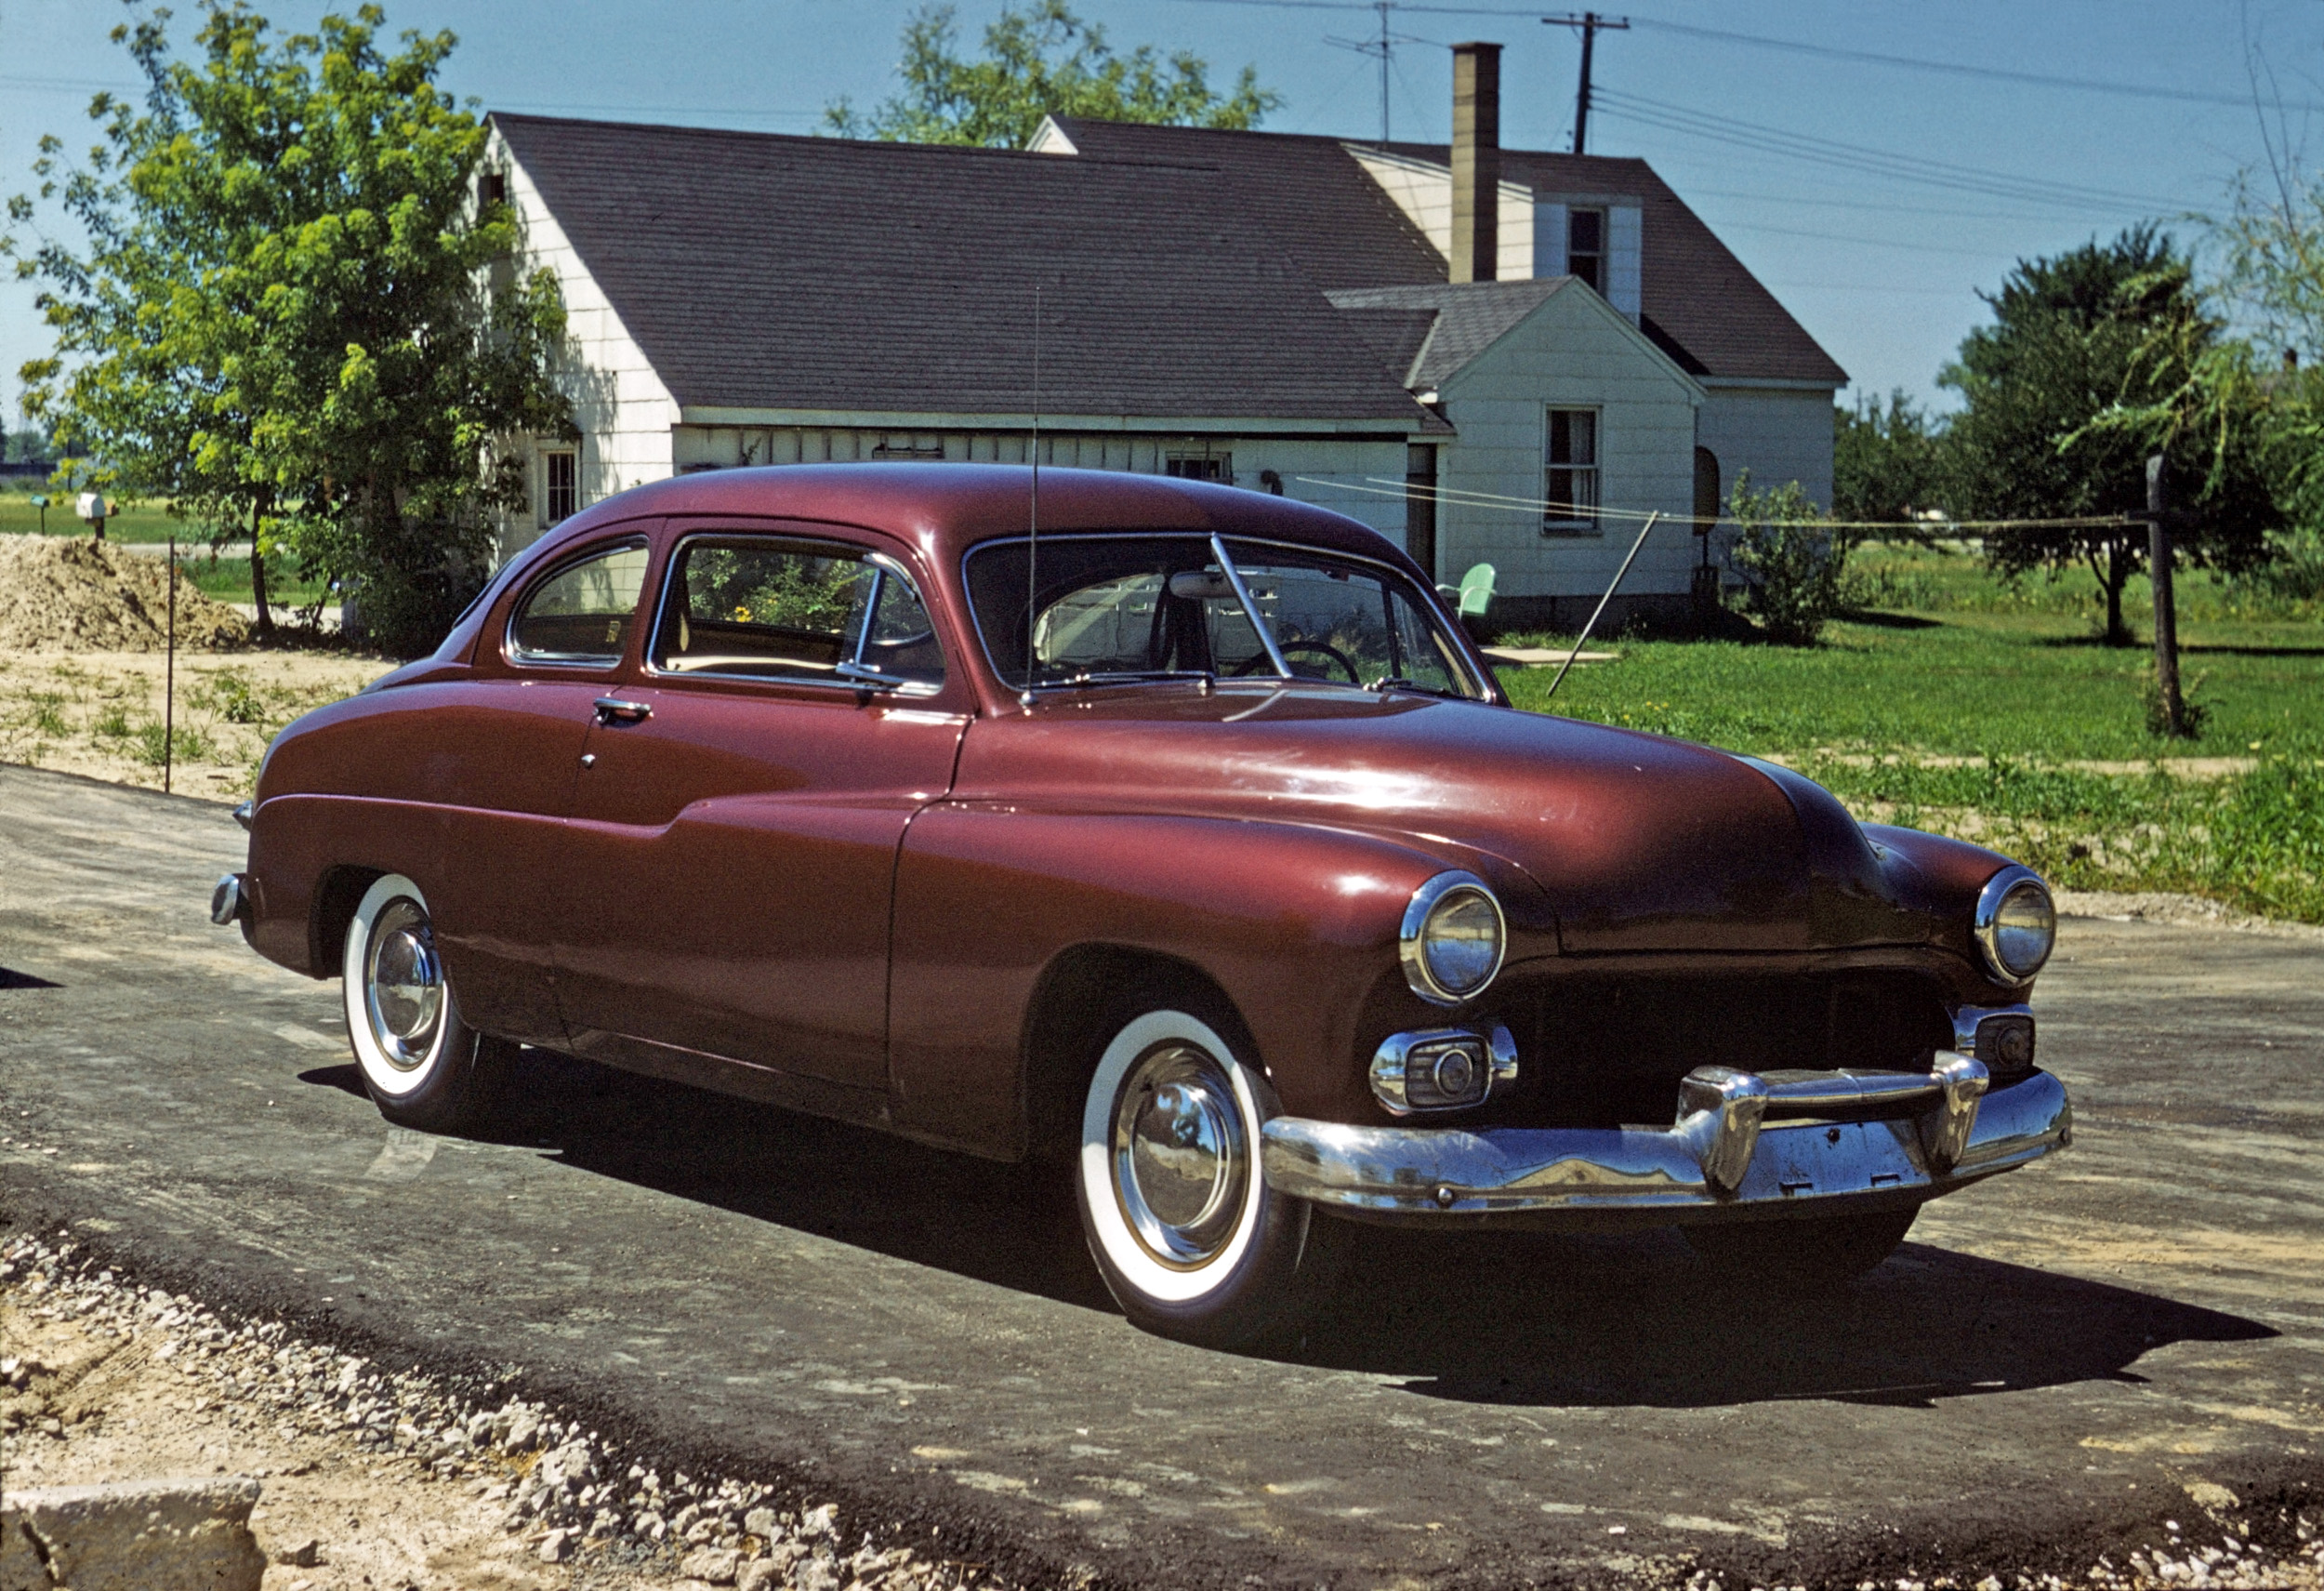 I found this 35mm Kodachrome slide dated December, 1959 in a collection at a swap meet. View full size.